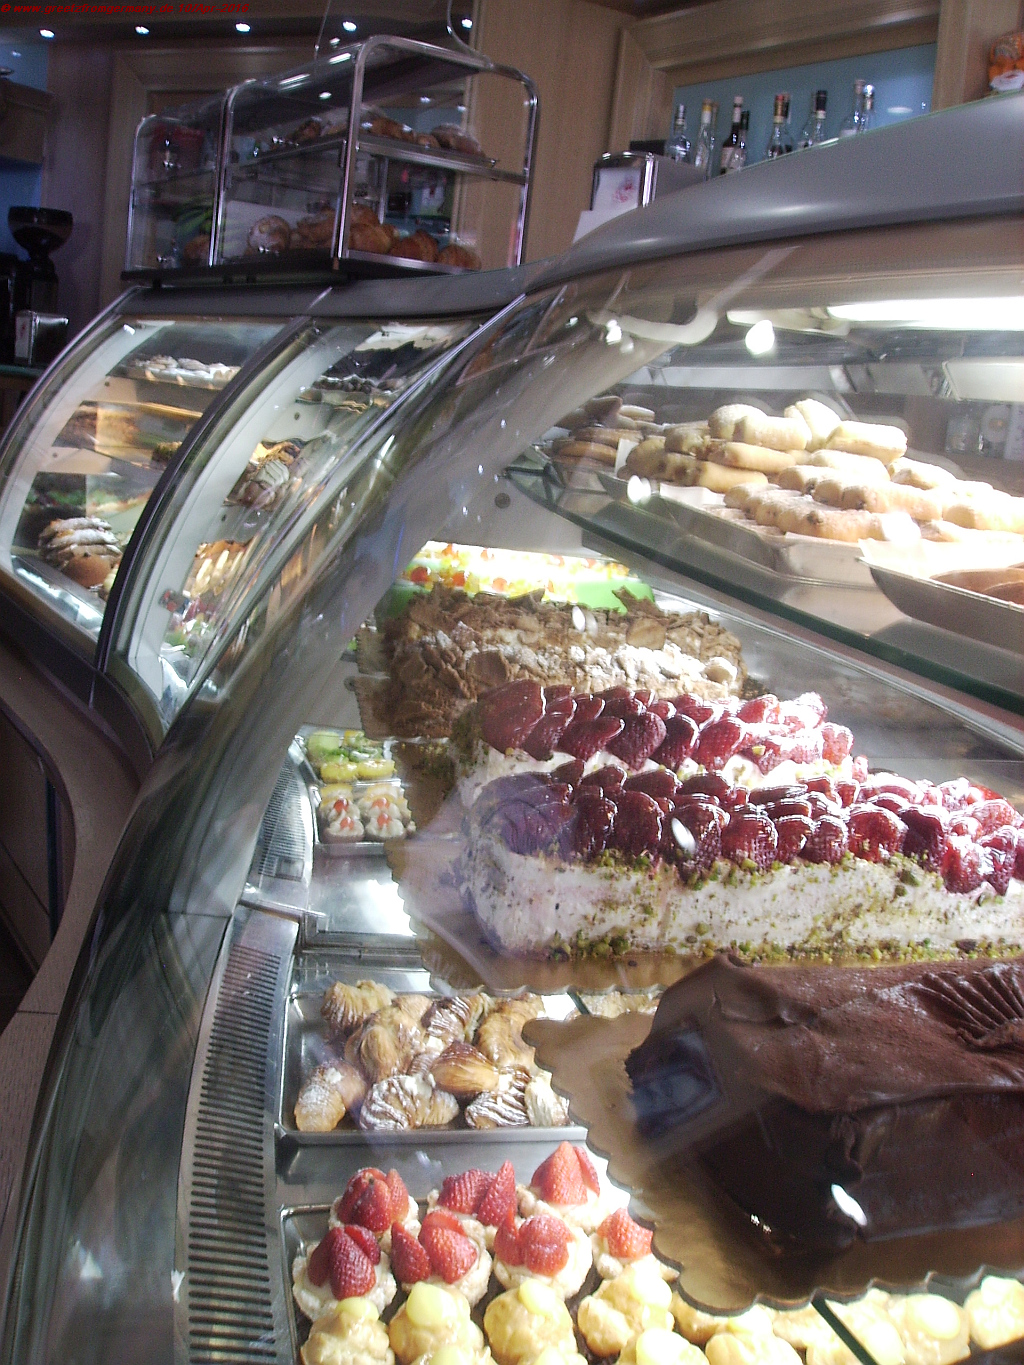 A typical small village bakery display of assorted cakes and sweets.